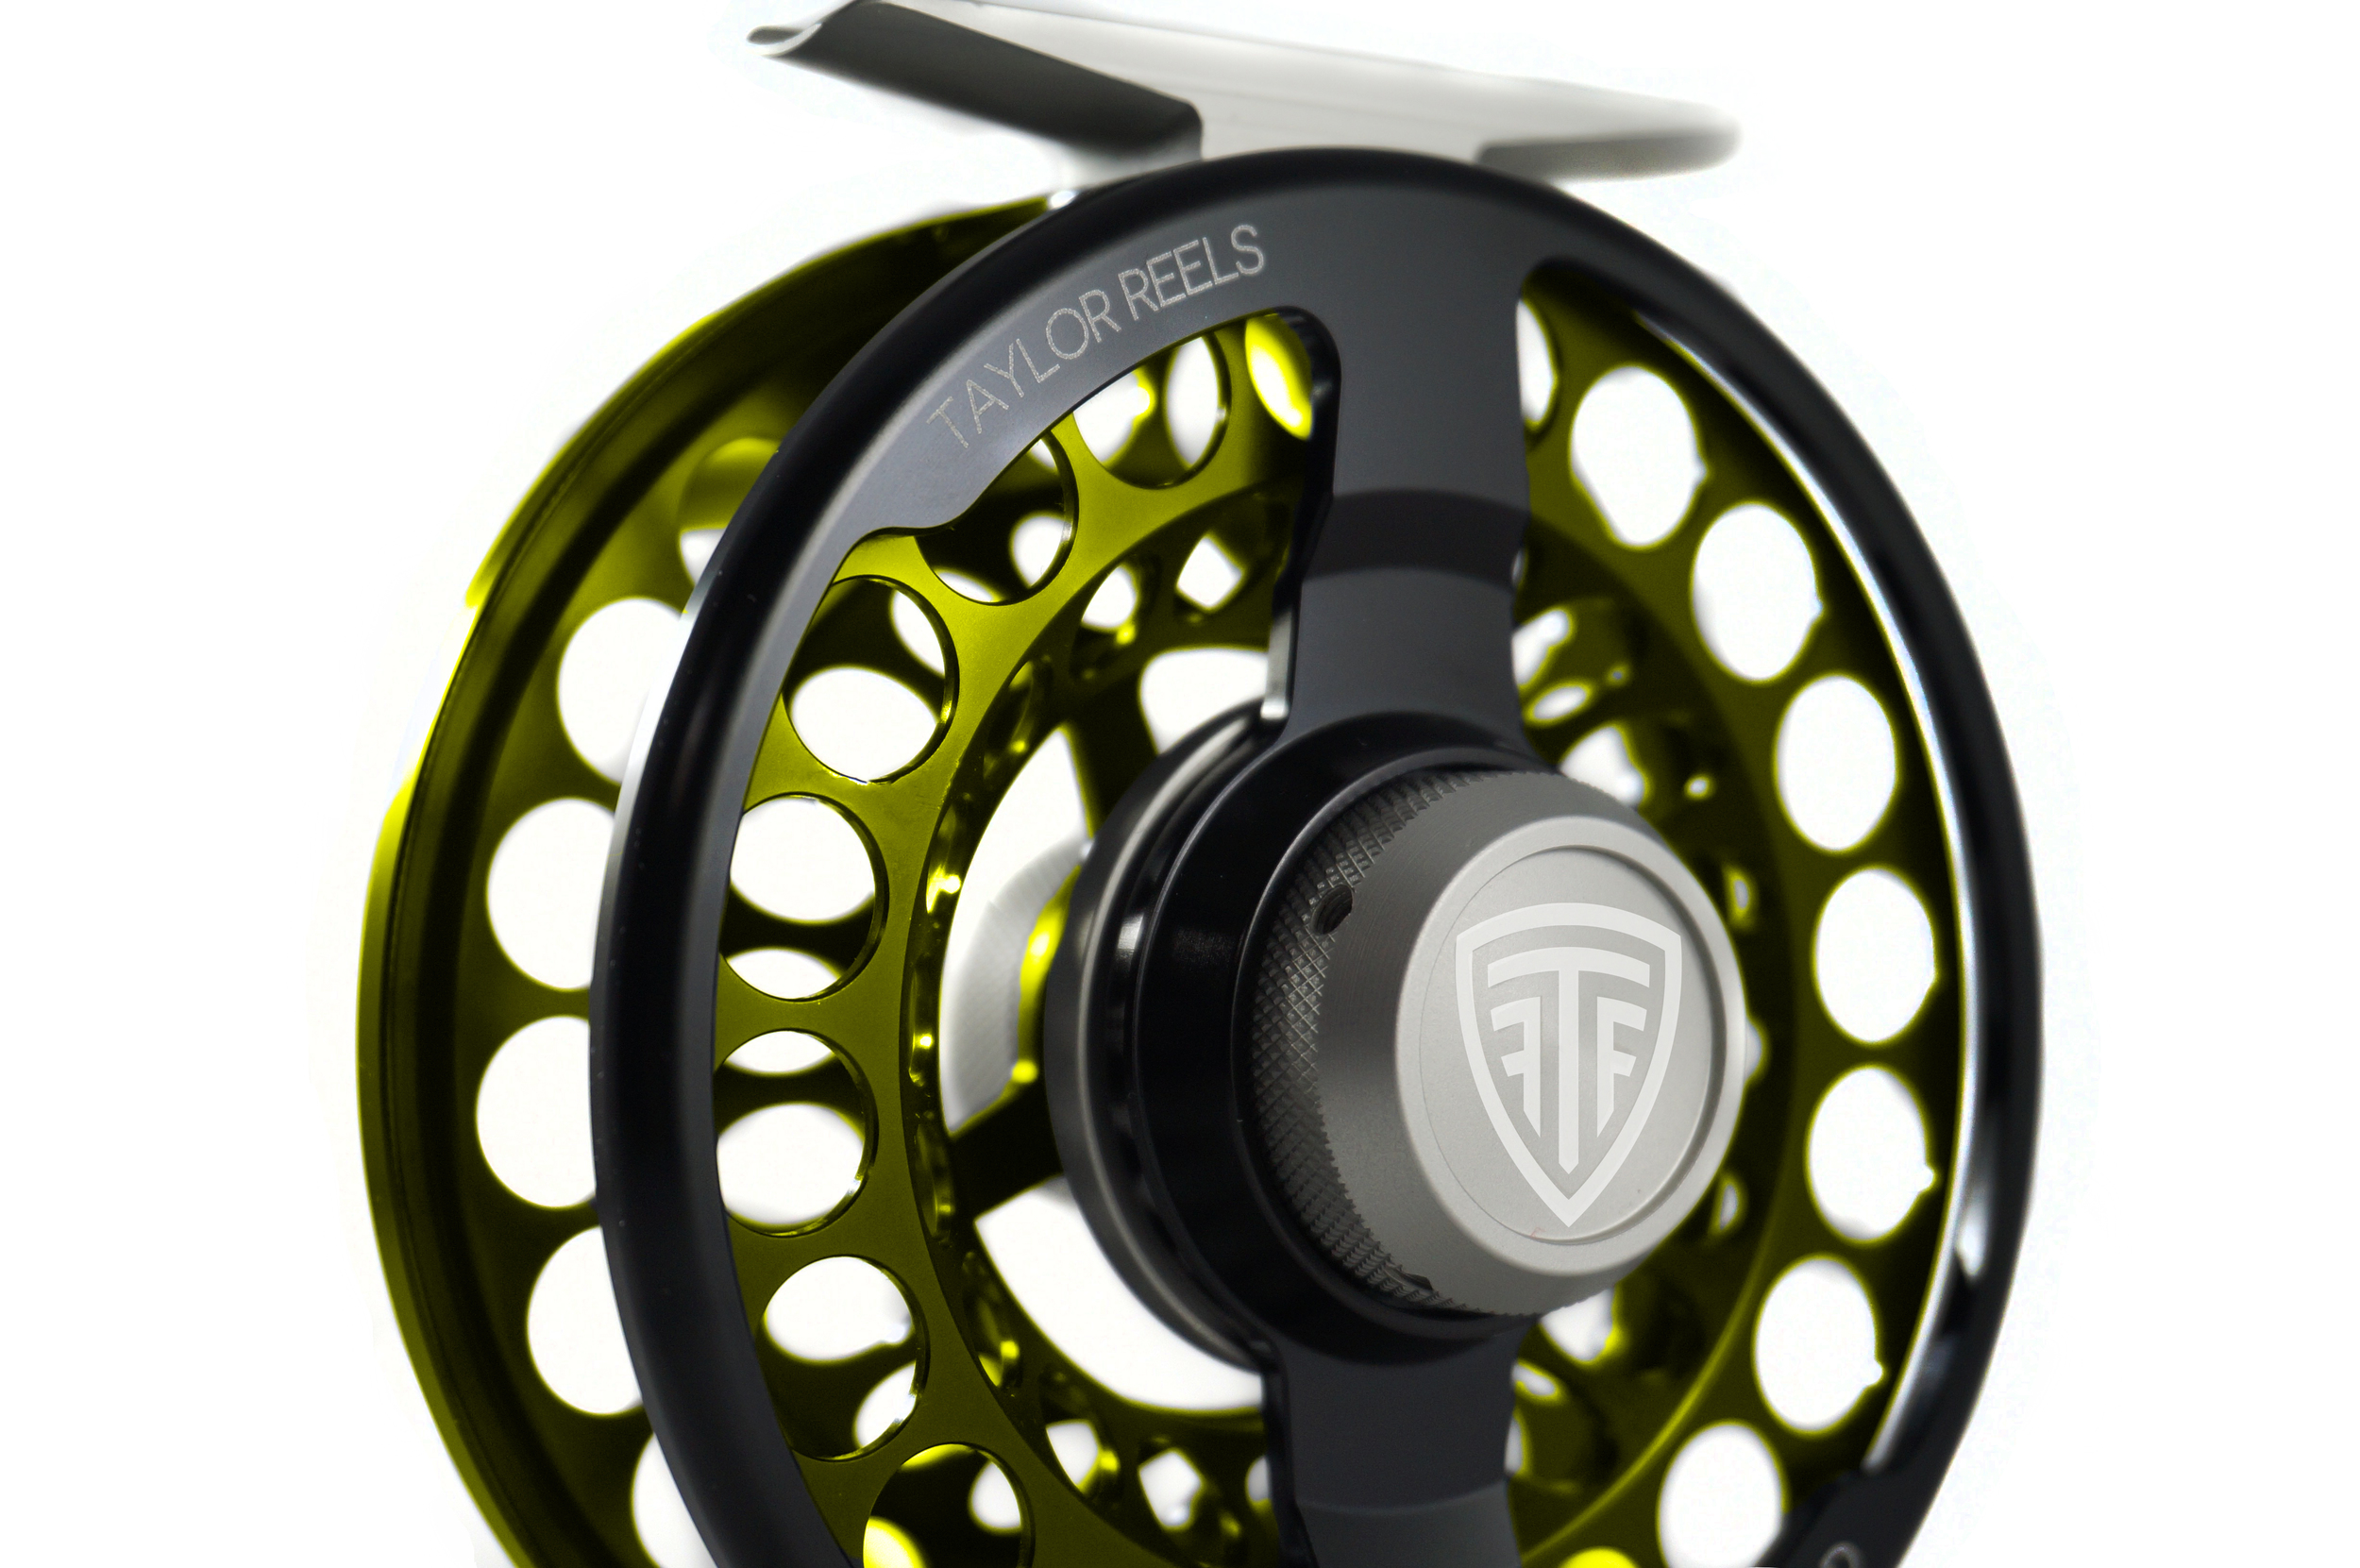 Designing better fly reels — Taylor Fly Fishing